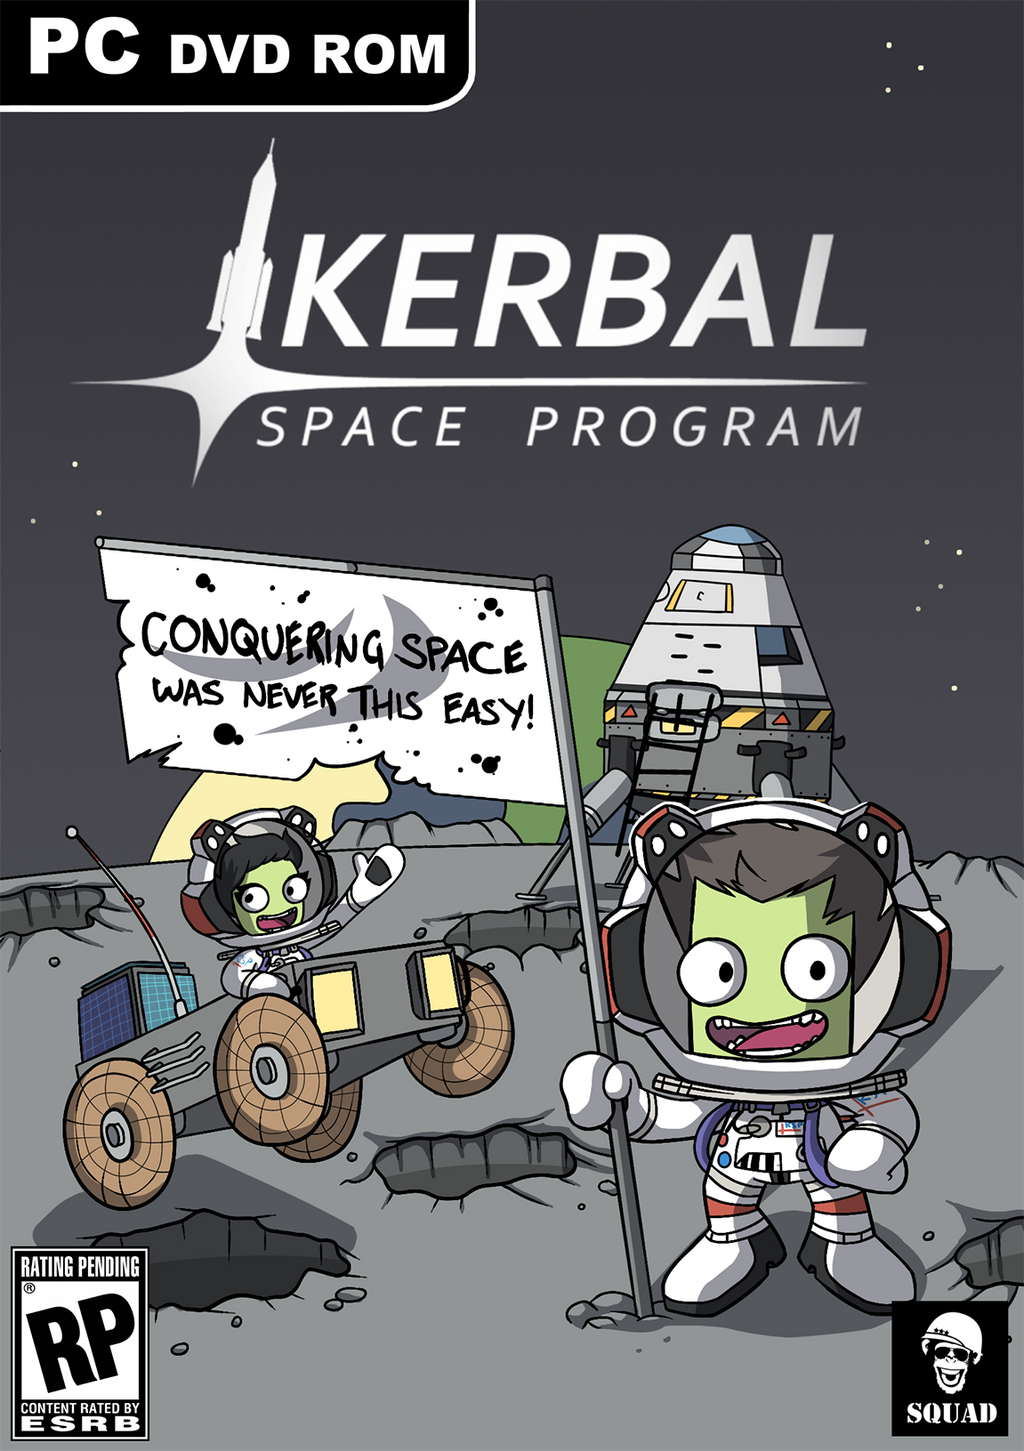 ksp_box_art_contest_entry_by_y0rshee-d9a3nol.png